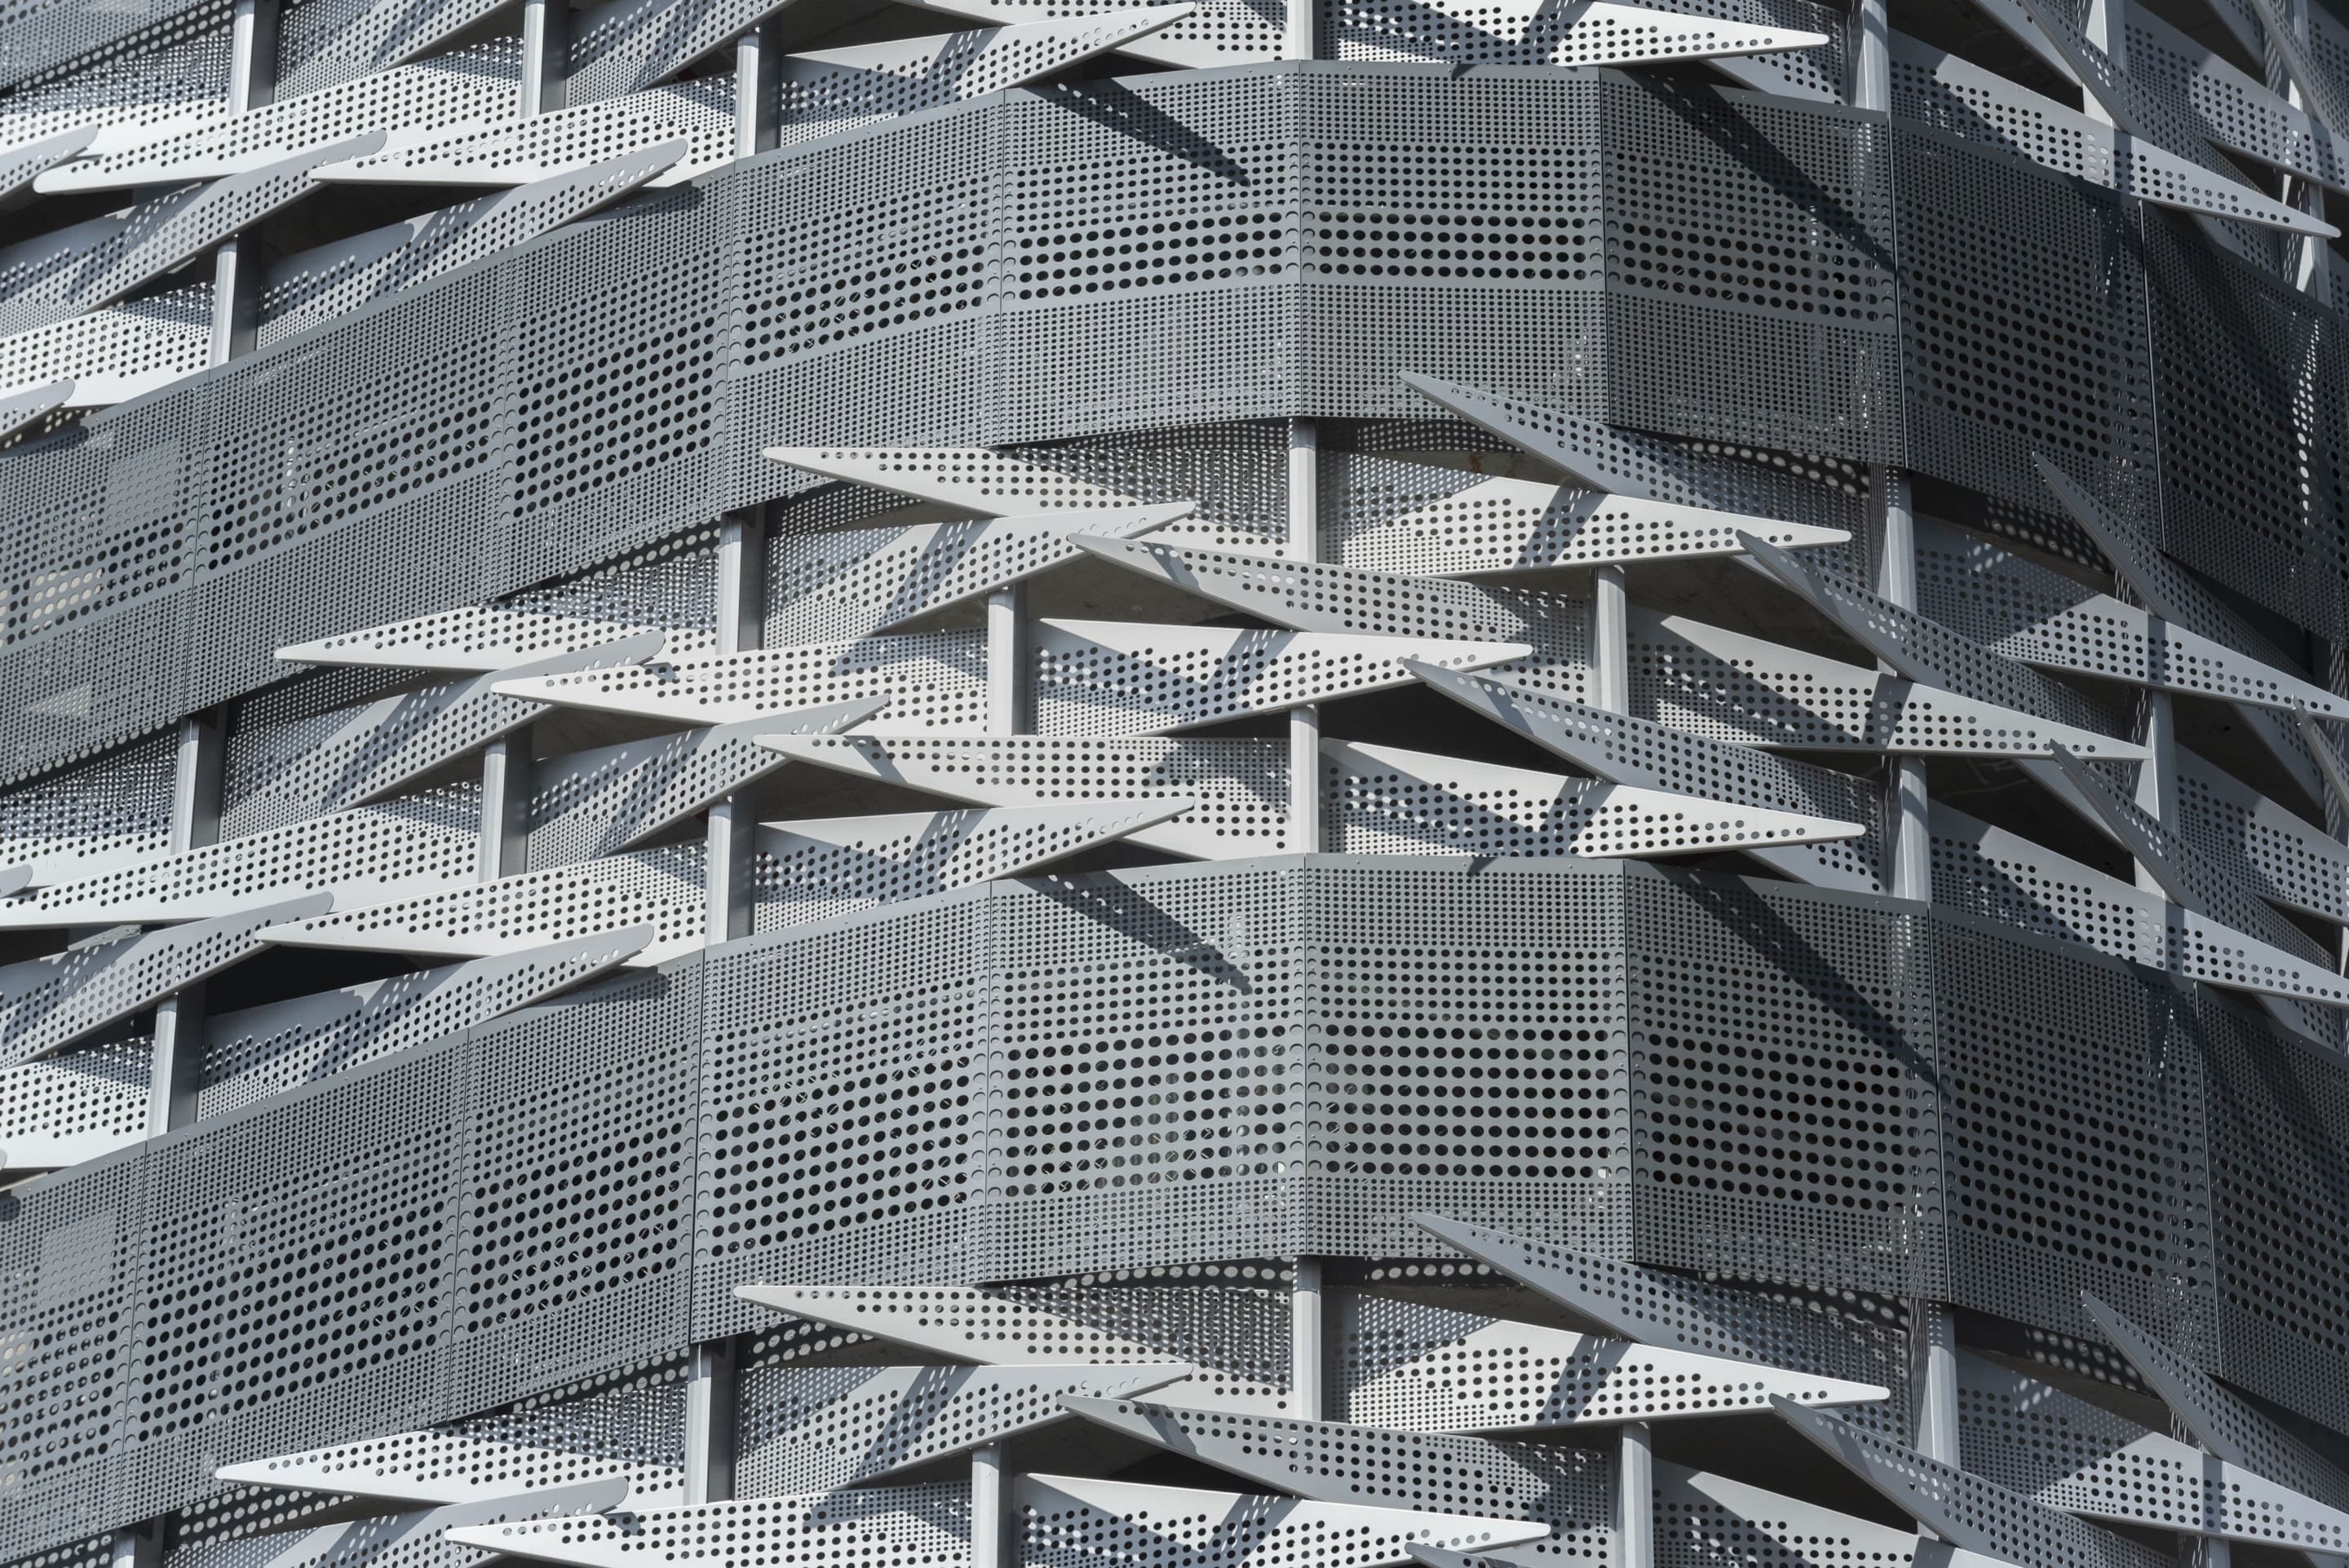 Closeup of the custom metal facade for the Brickell Flatiron Parking Garage, produced by Zahner.